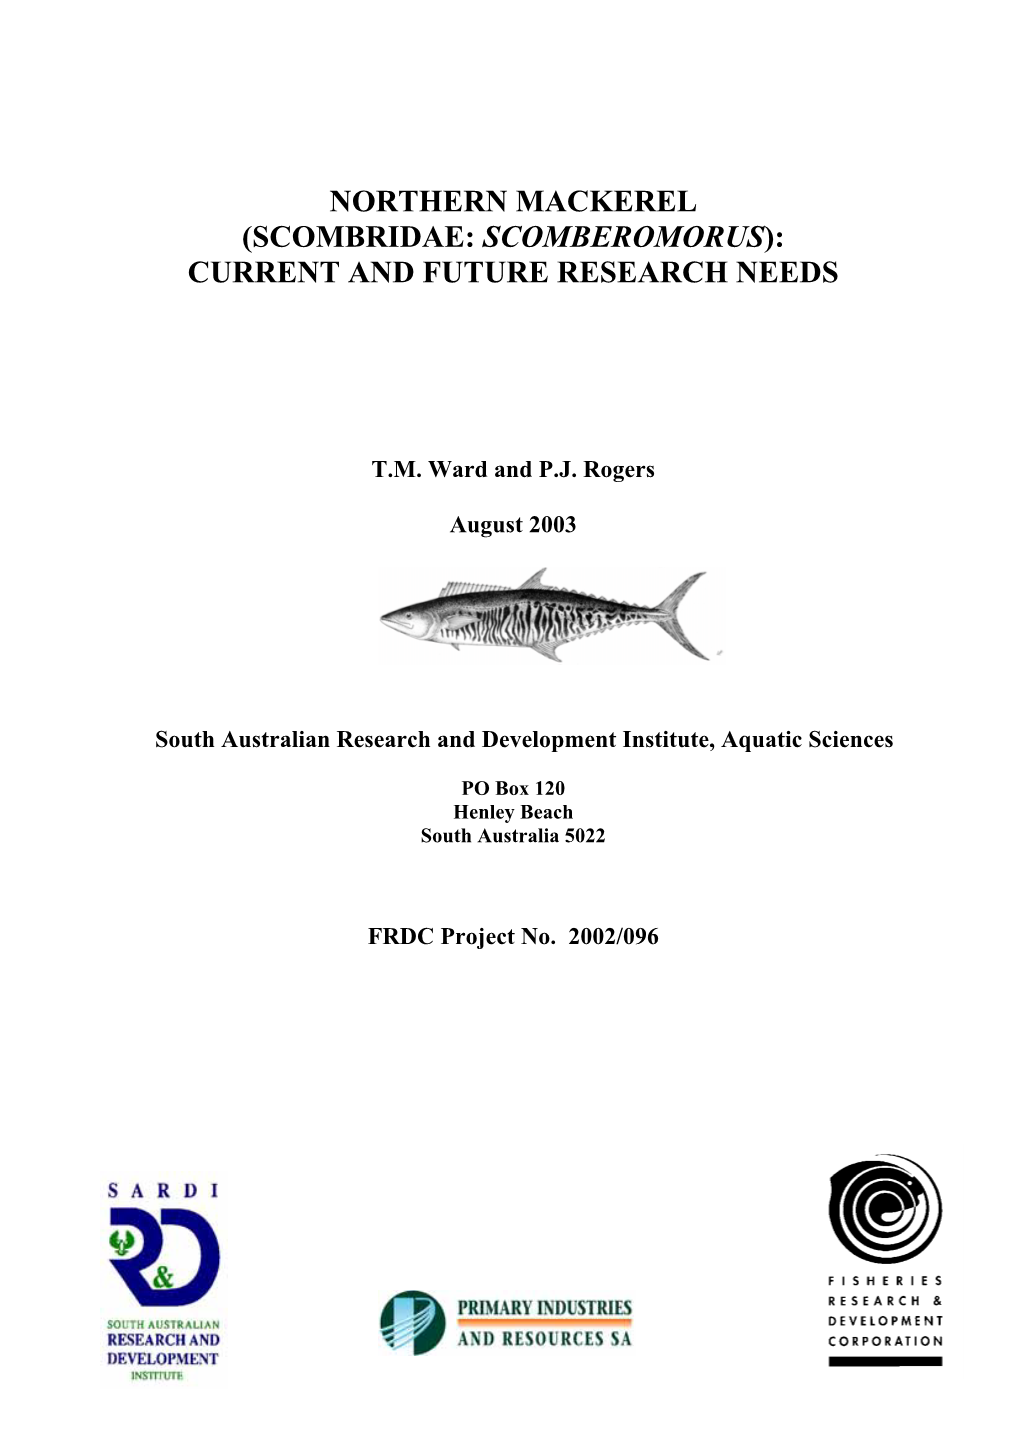 Independent Review of Research on the Northern Mackerel Fisheries